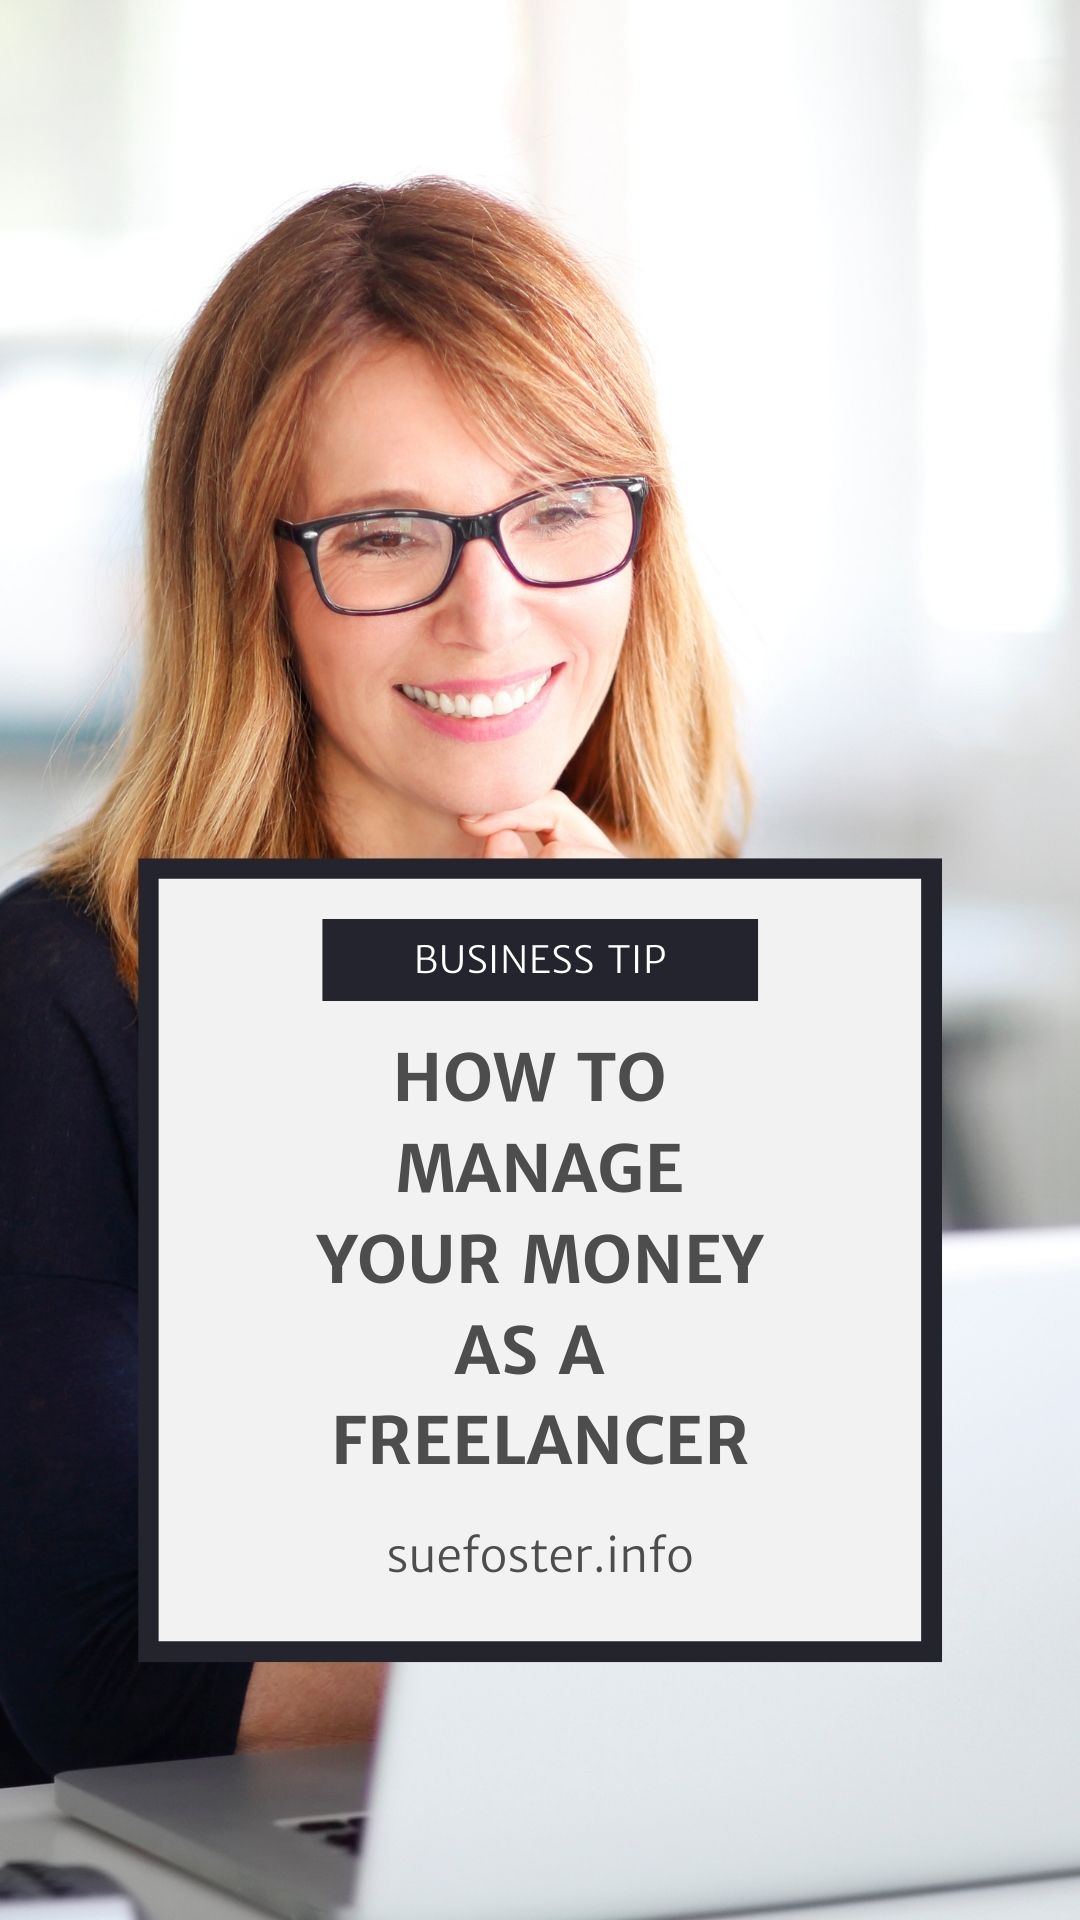 In the world of freelancing, money comes and goes. Here's how to manage your money as a freelancer.